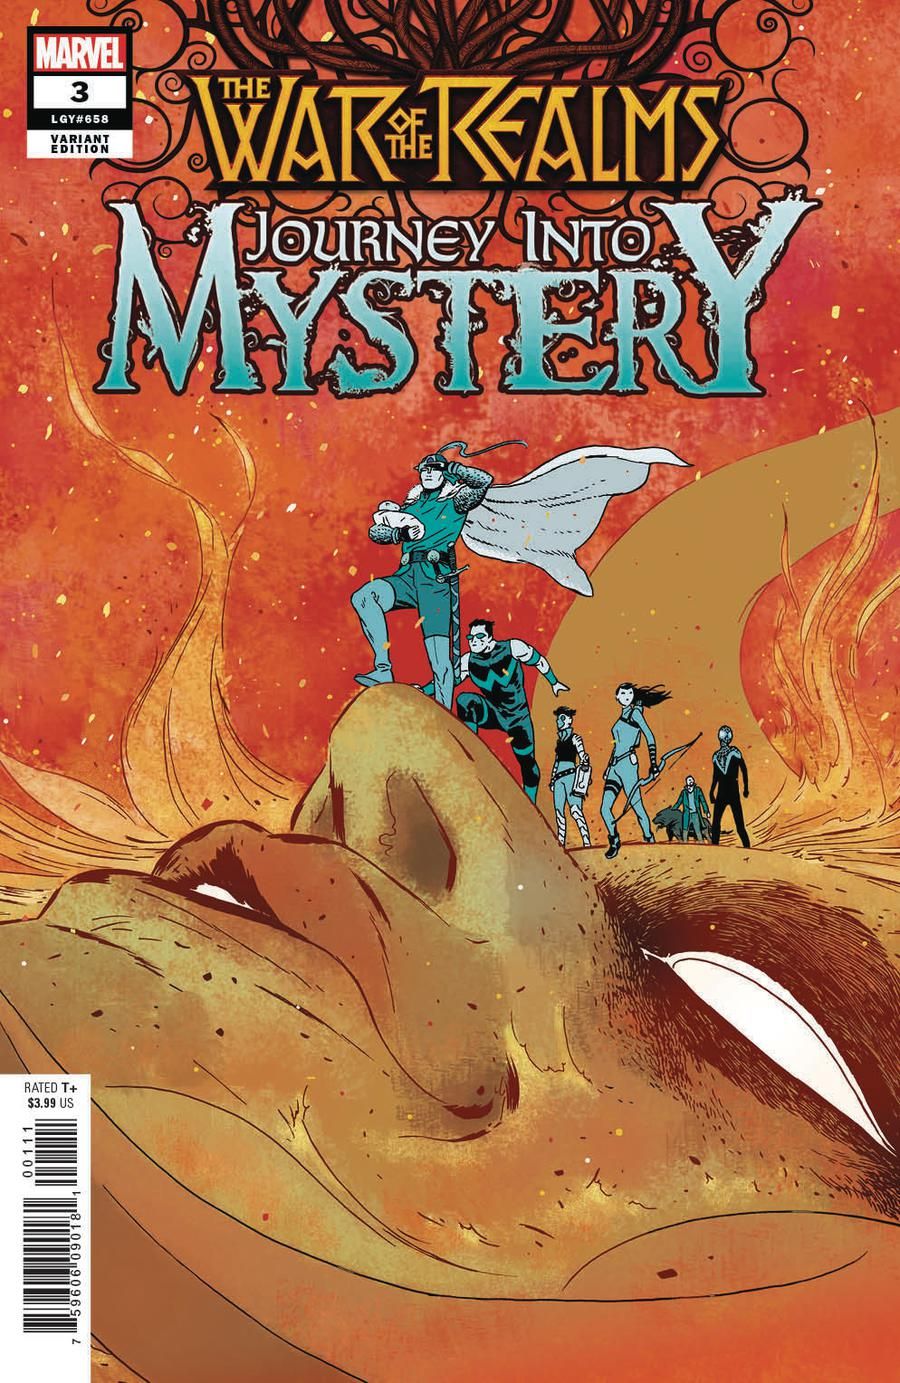 The War of the Realms: Journey Into Mystery #3